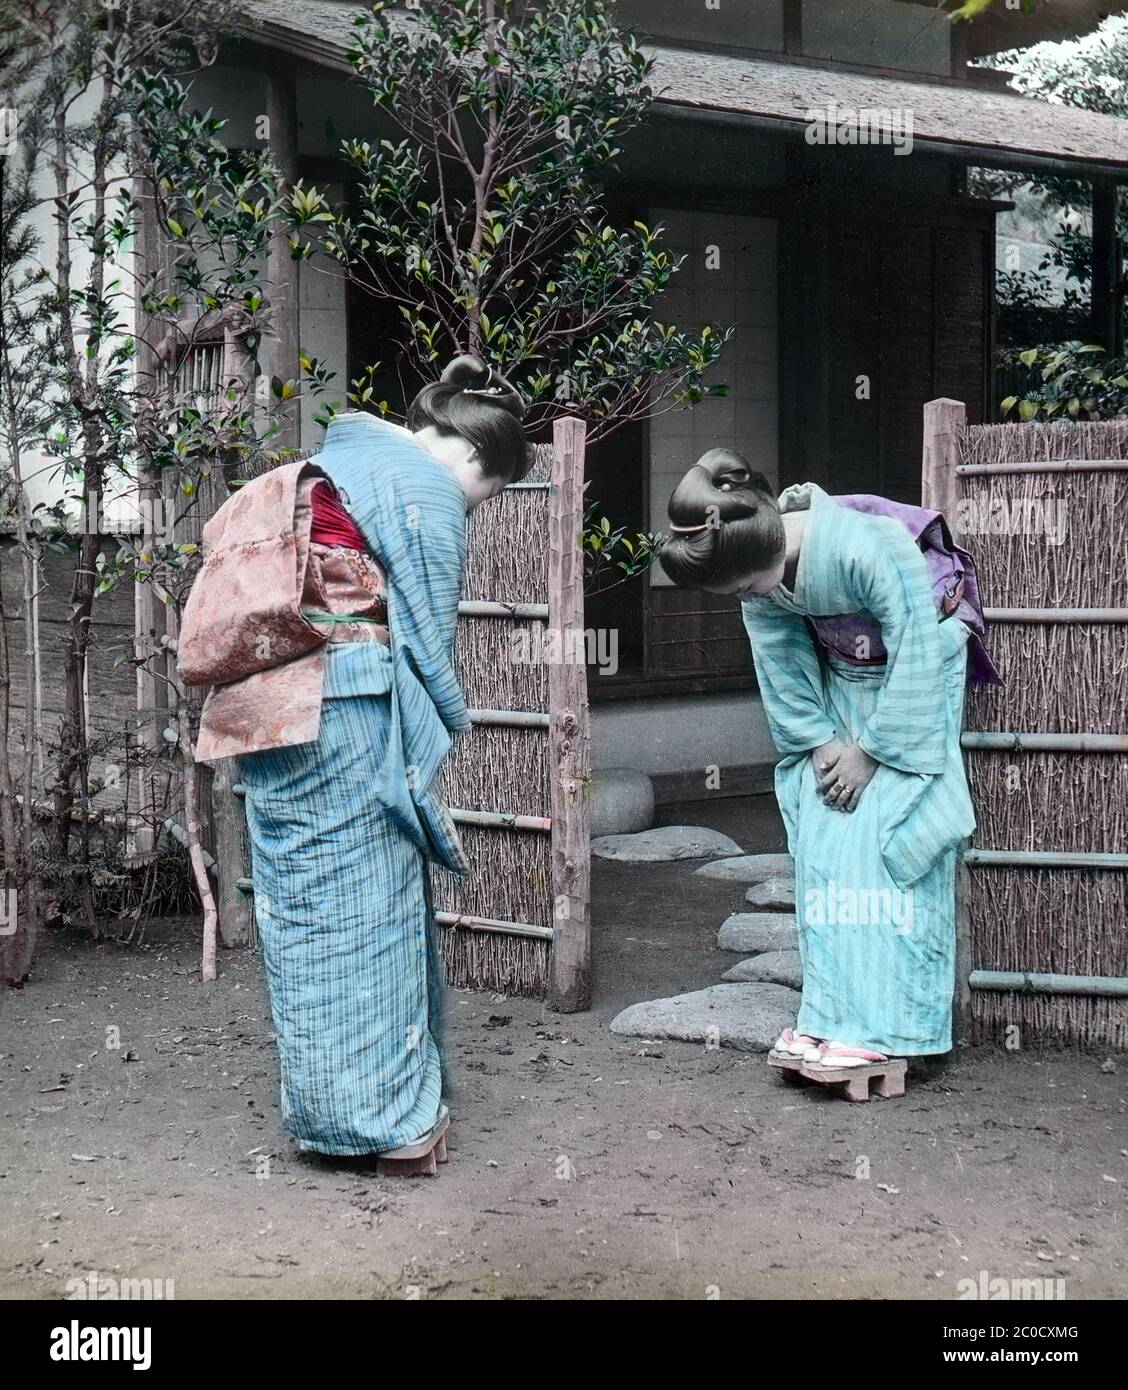 [ 1900s Japan - Women Greeting ] — Two women wearing kimono, geta and traditional hairstyles bow to each other in the yard of a restaurant.  20th century vintage glass slide. Stock Photo